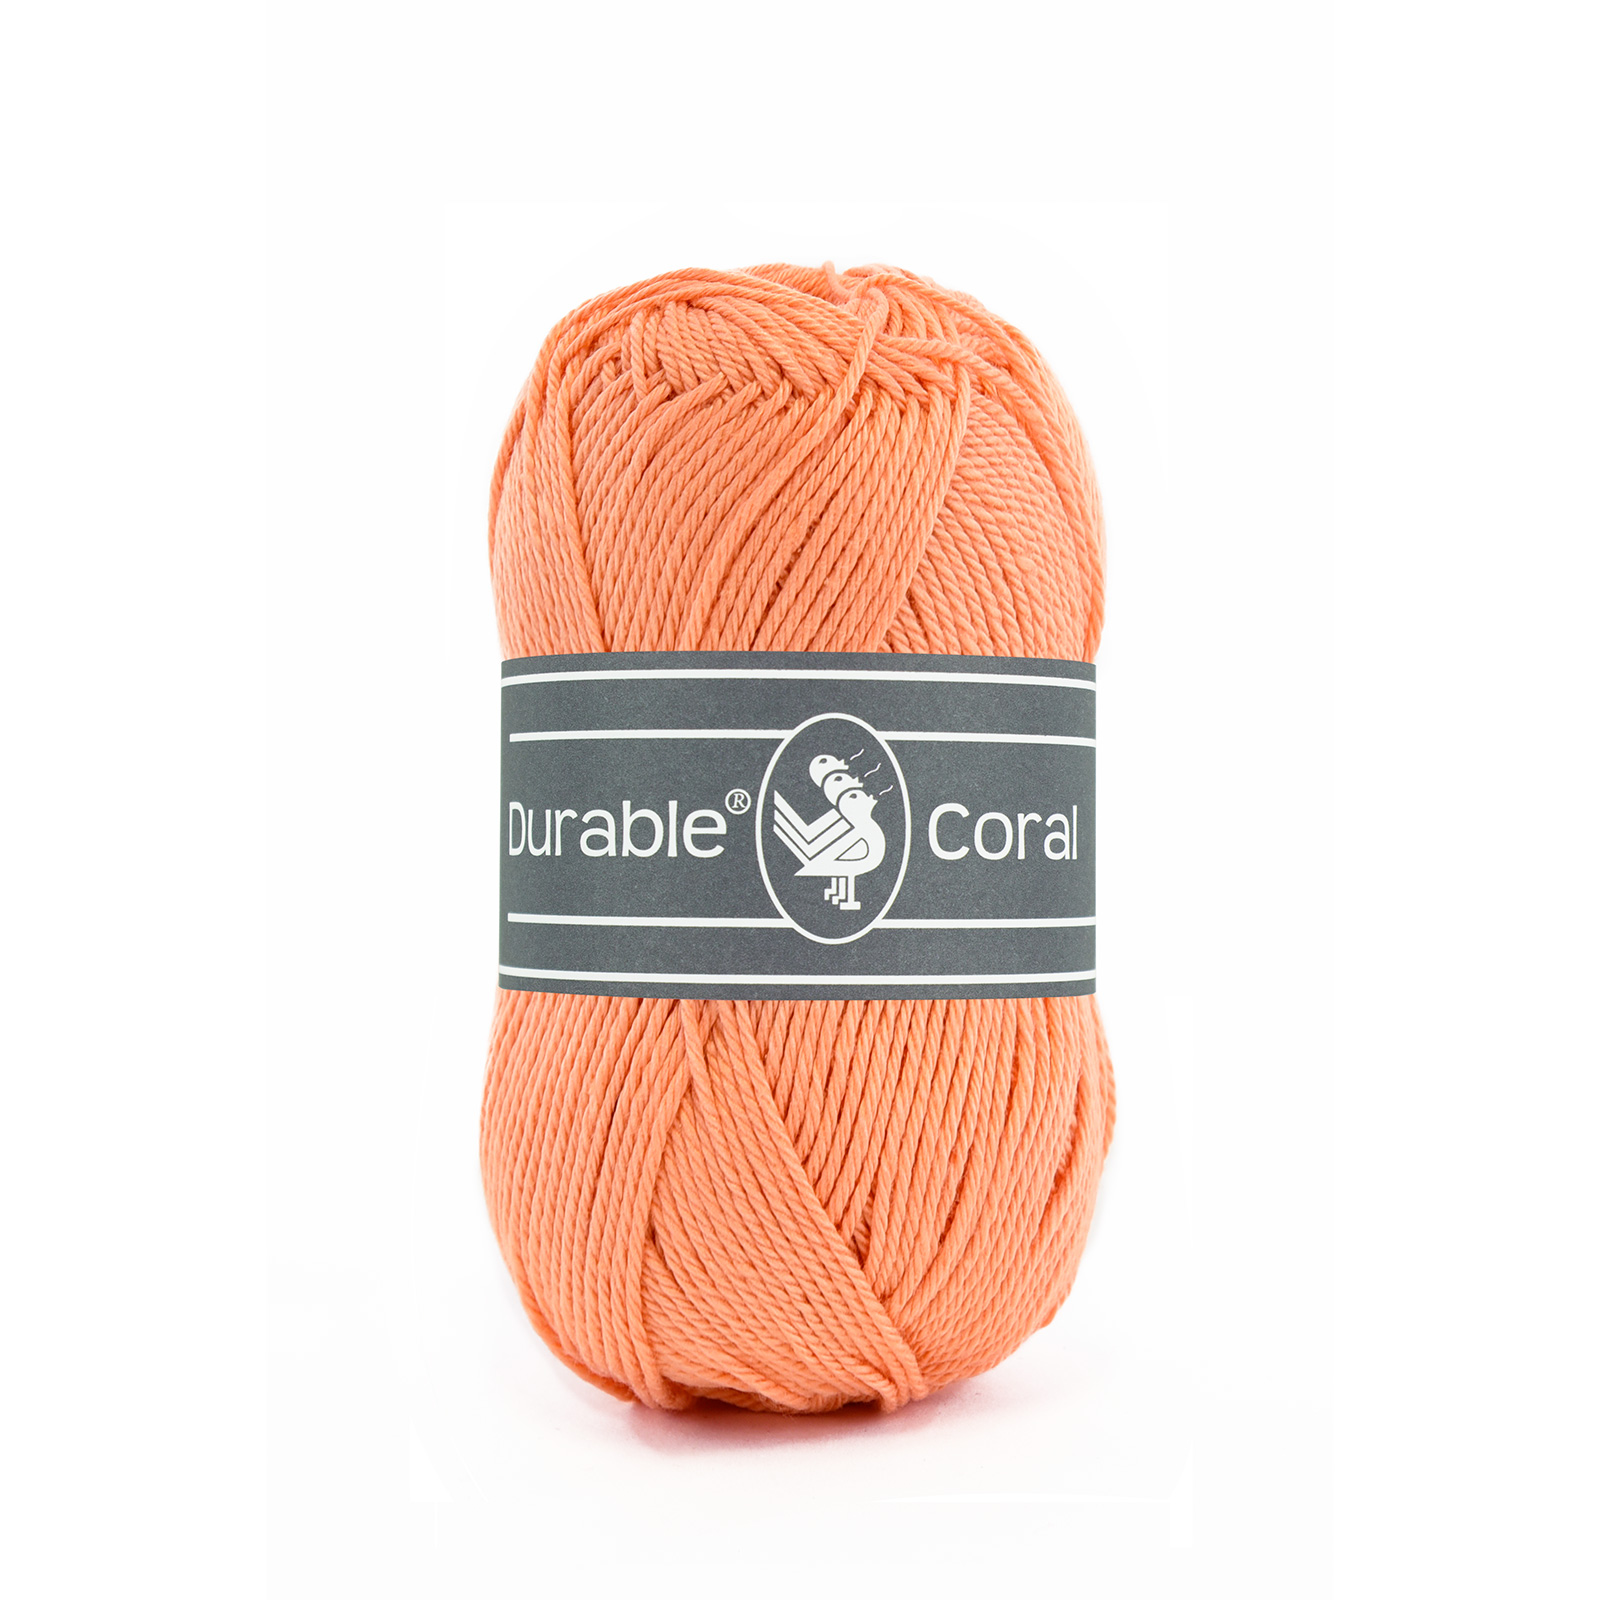 Durable Coral Apricot-2195